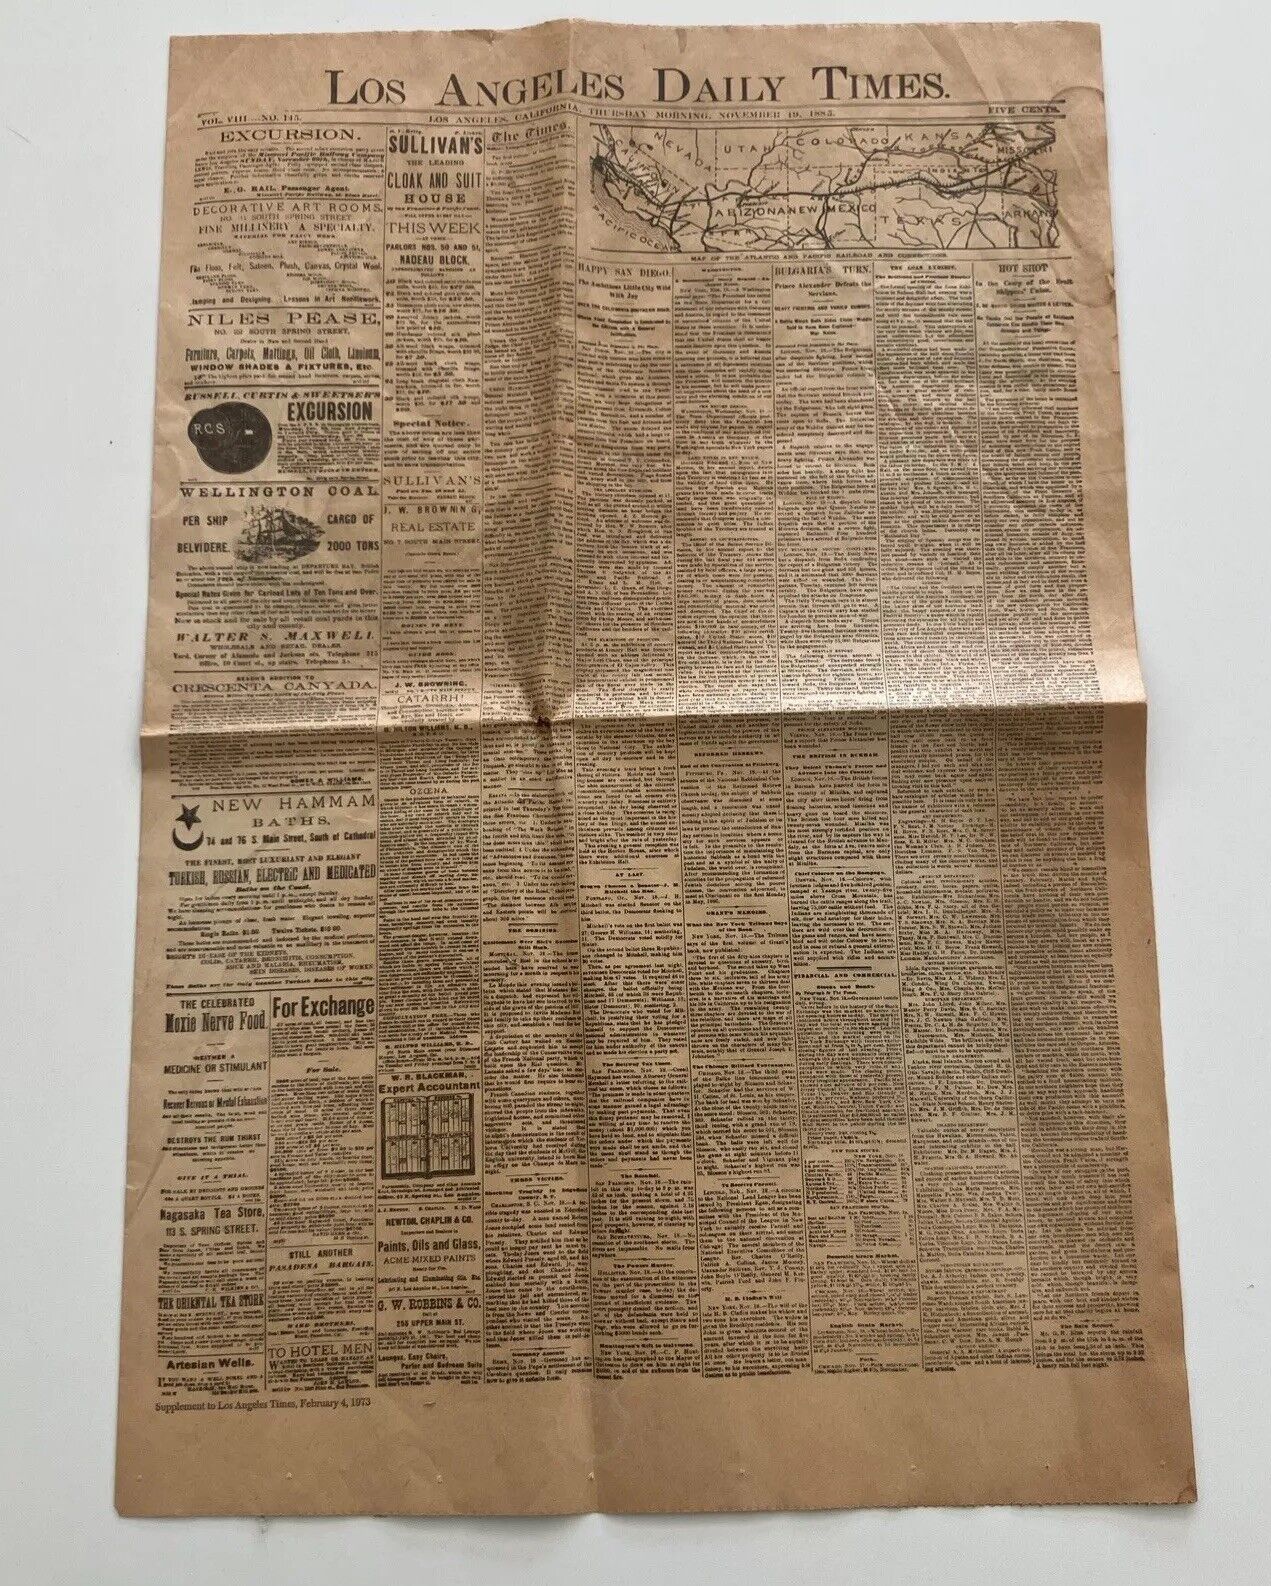 1973 Los Angeles Daily Times 1885 + 1910 + WW1 Reproduction LA Times Newspaper